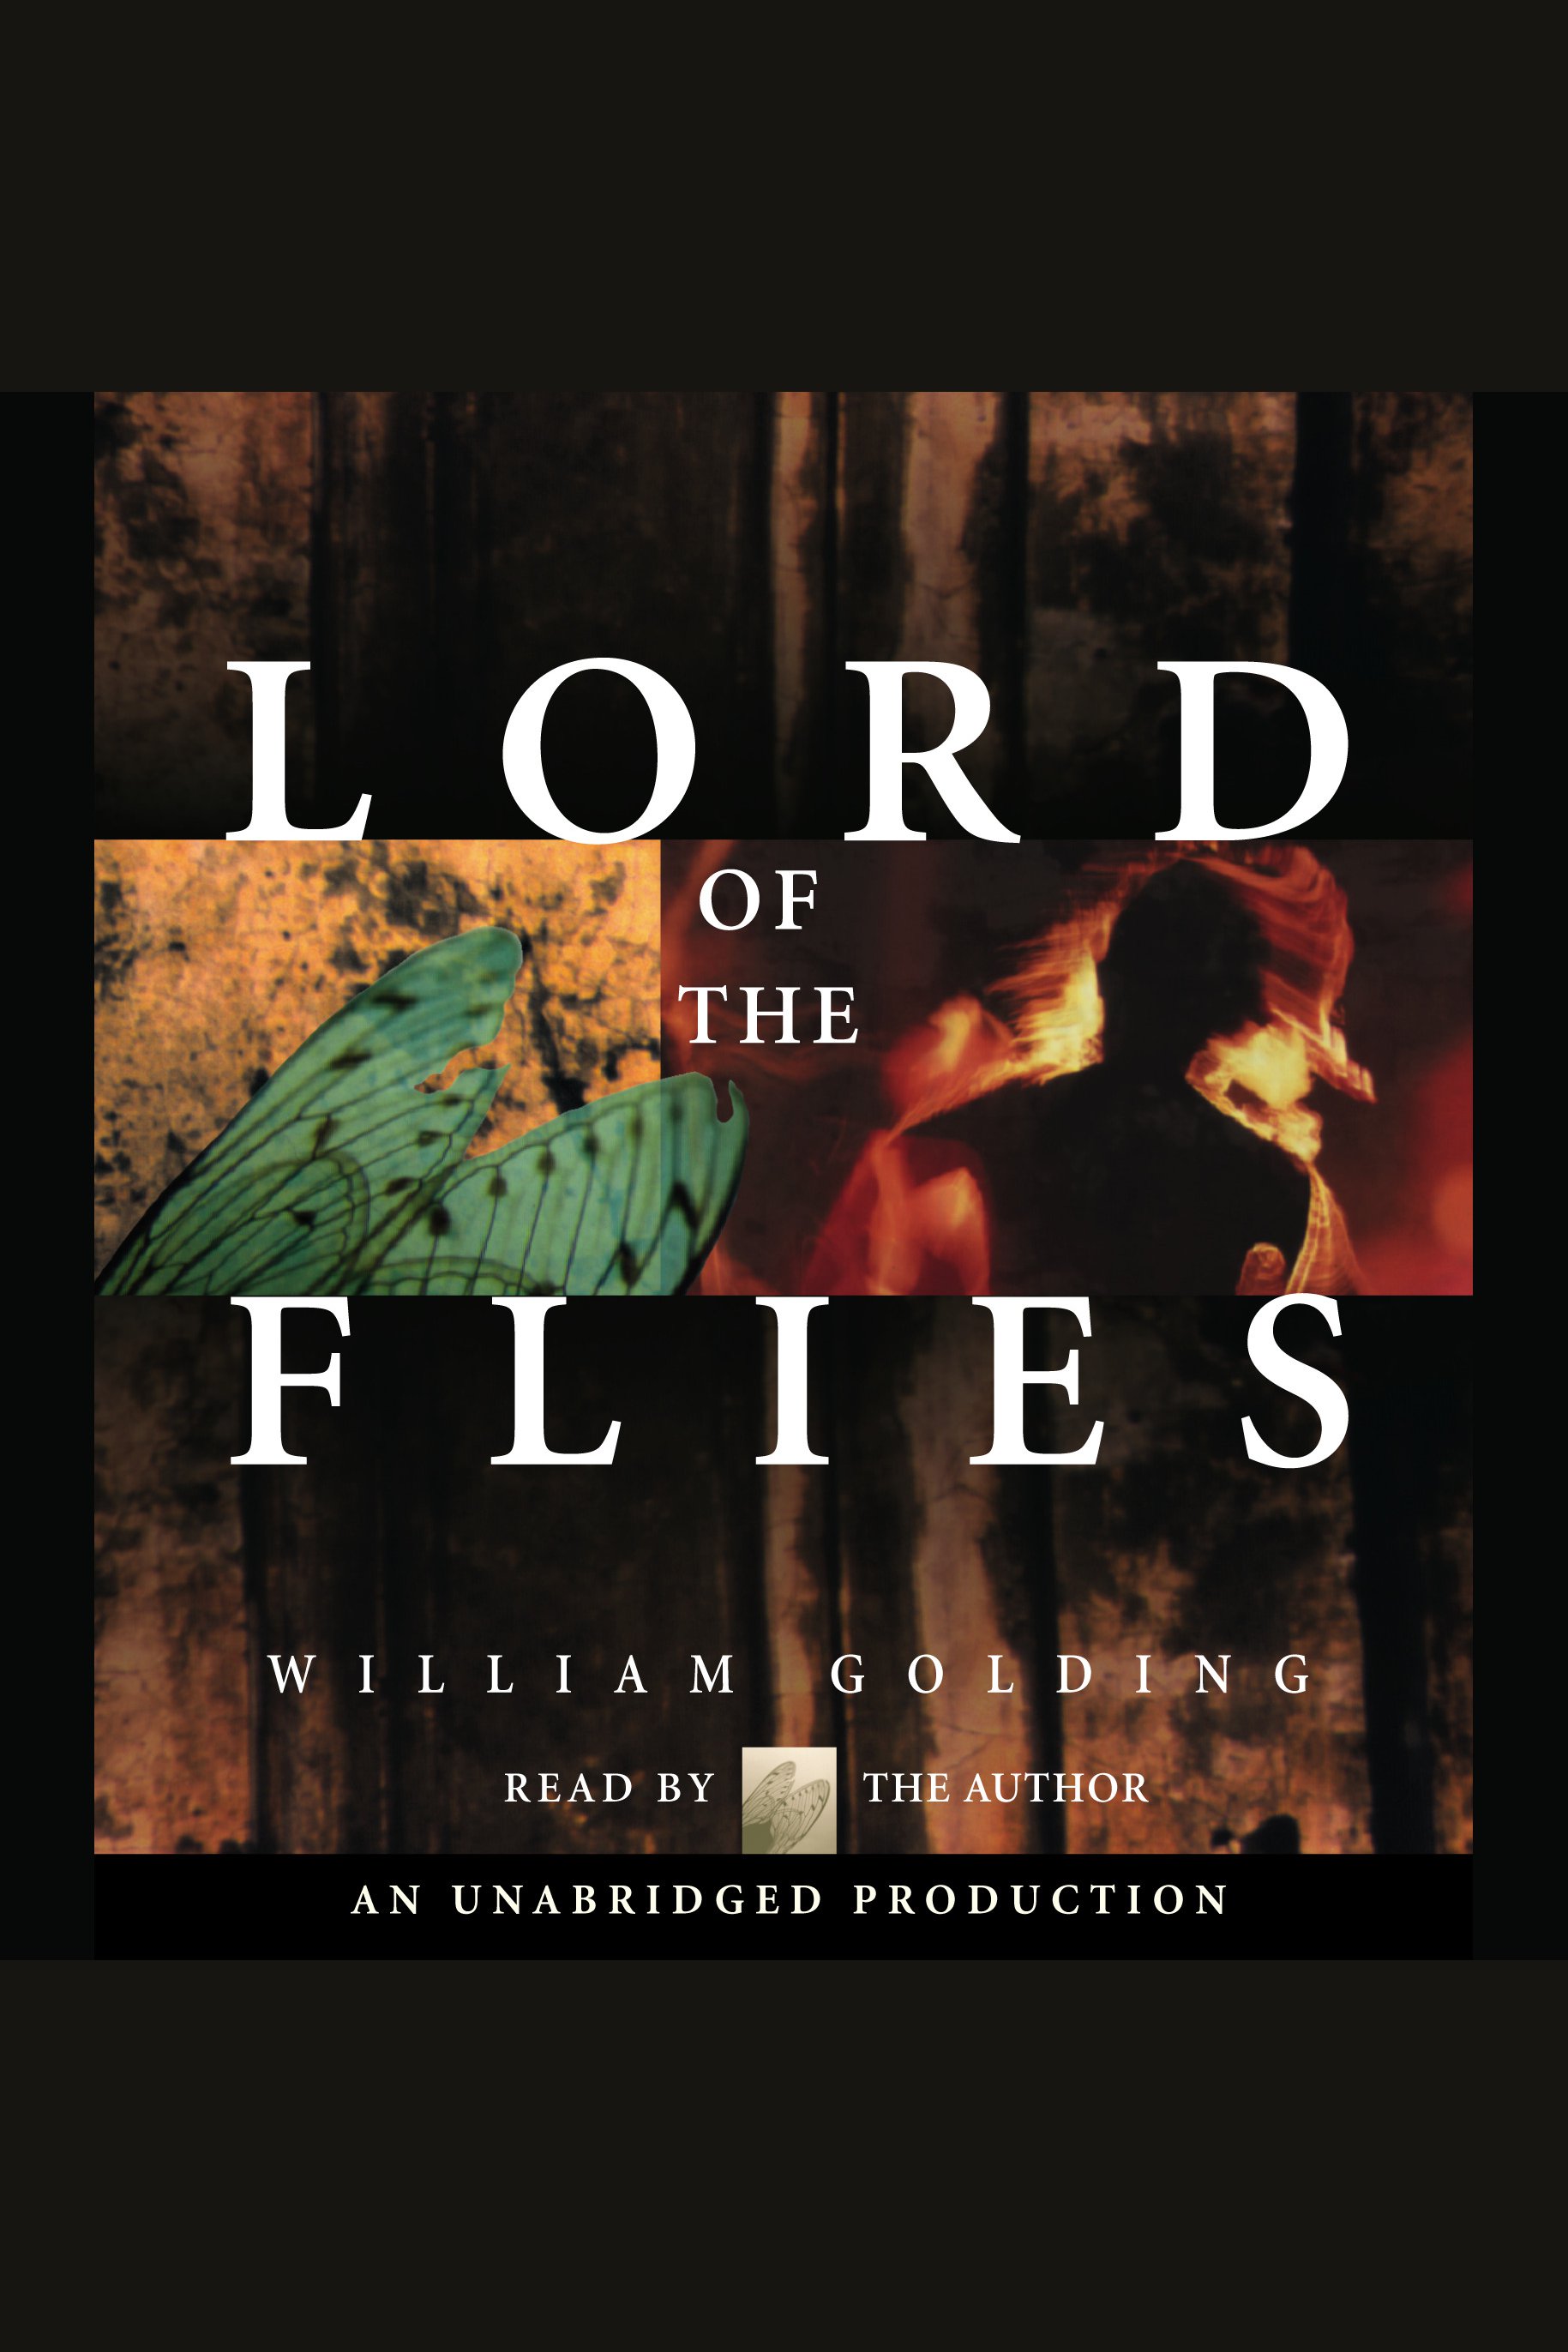 Lord of the flies cover image